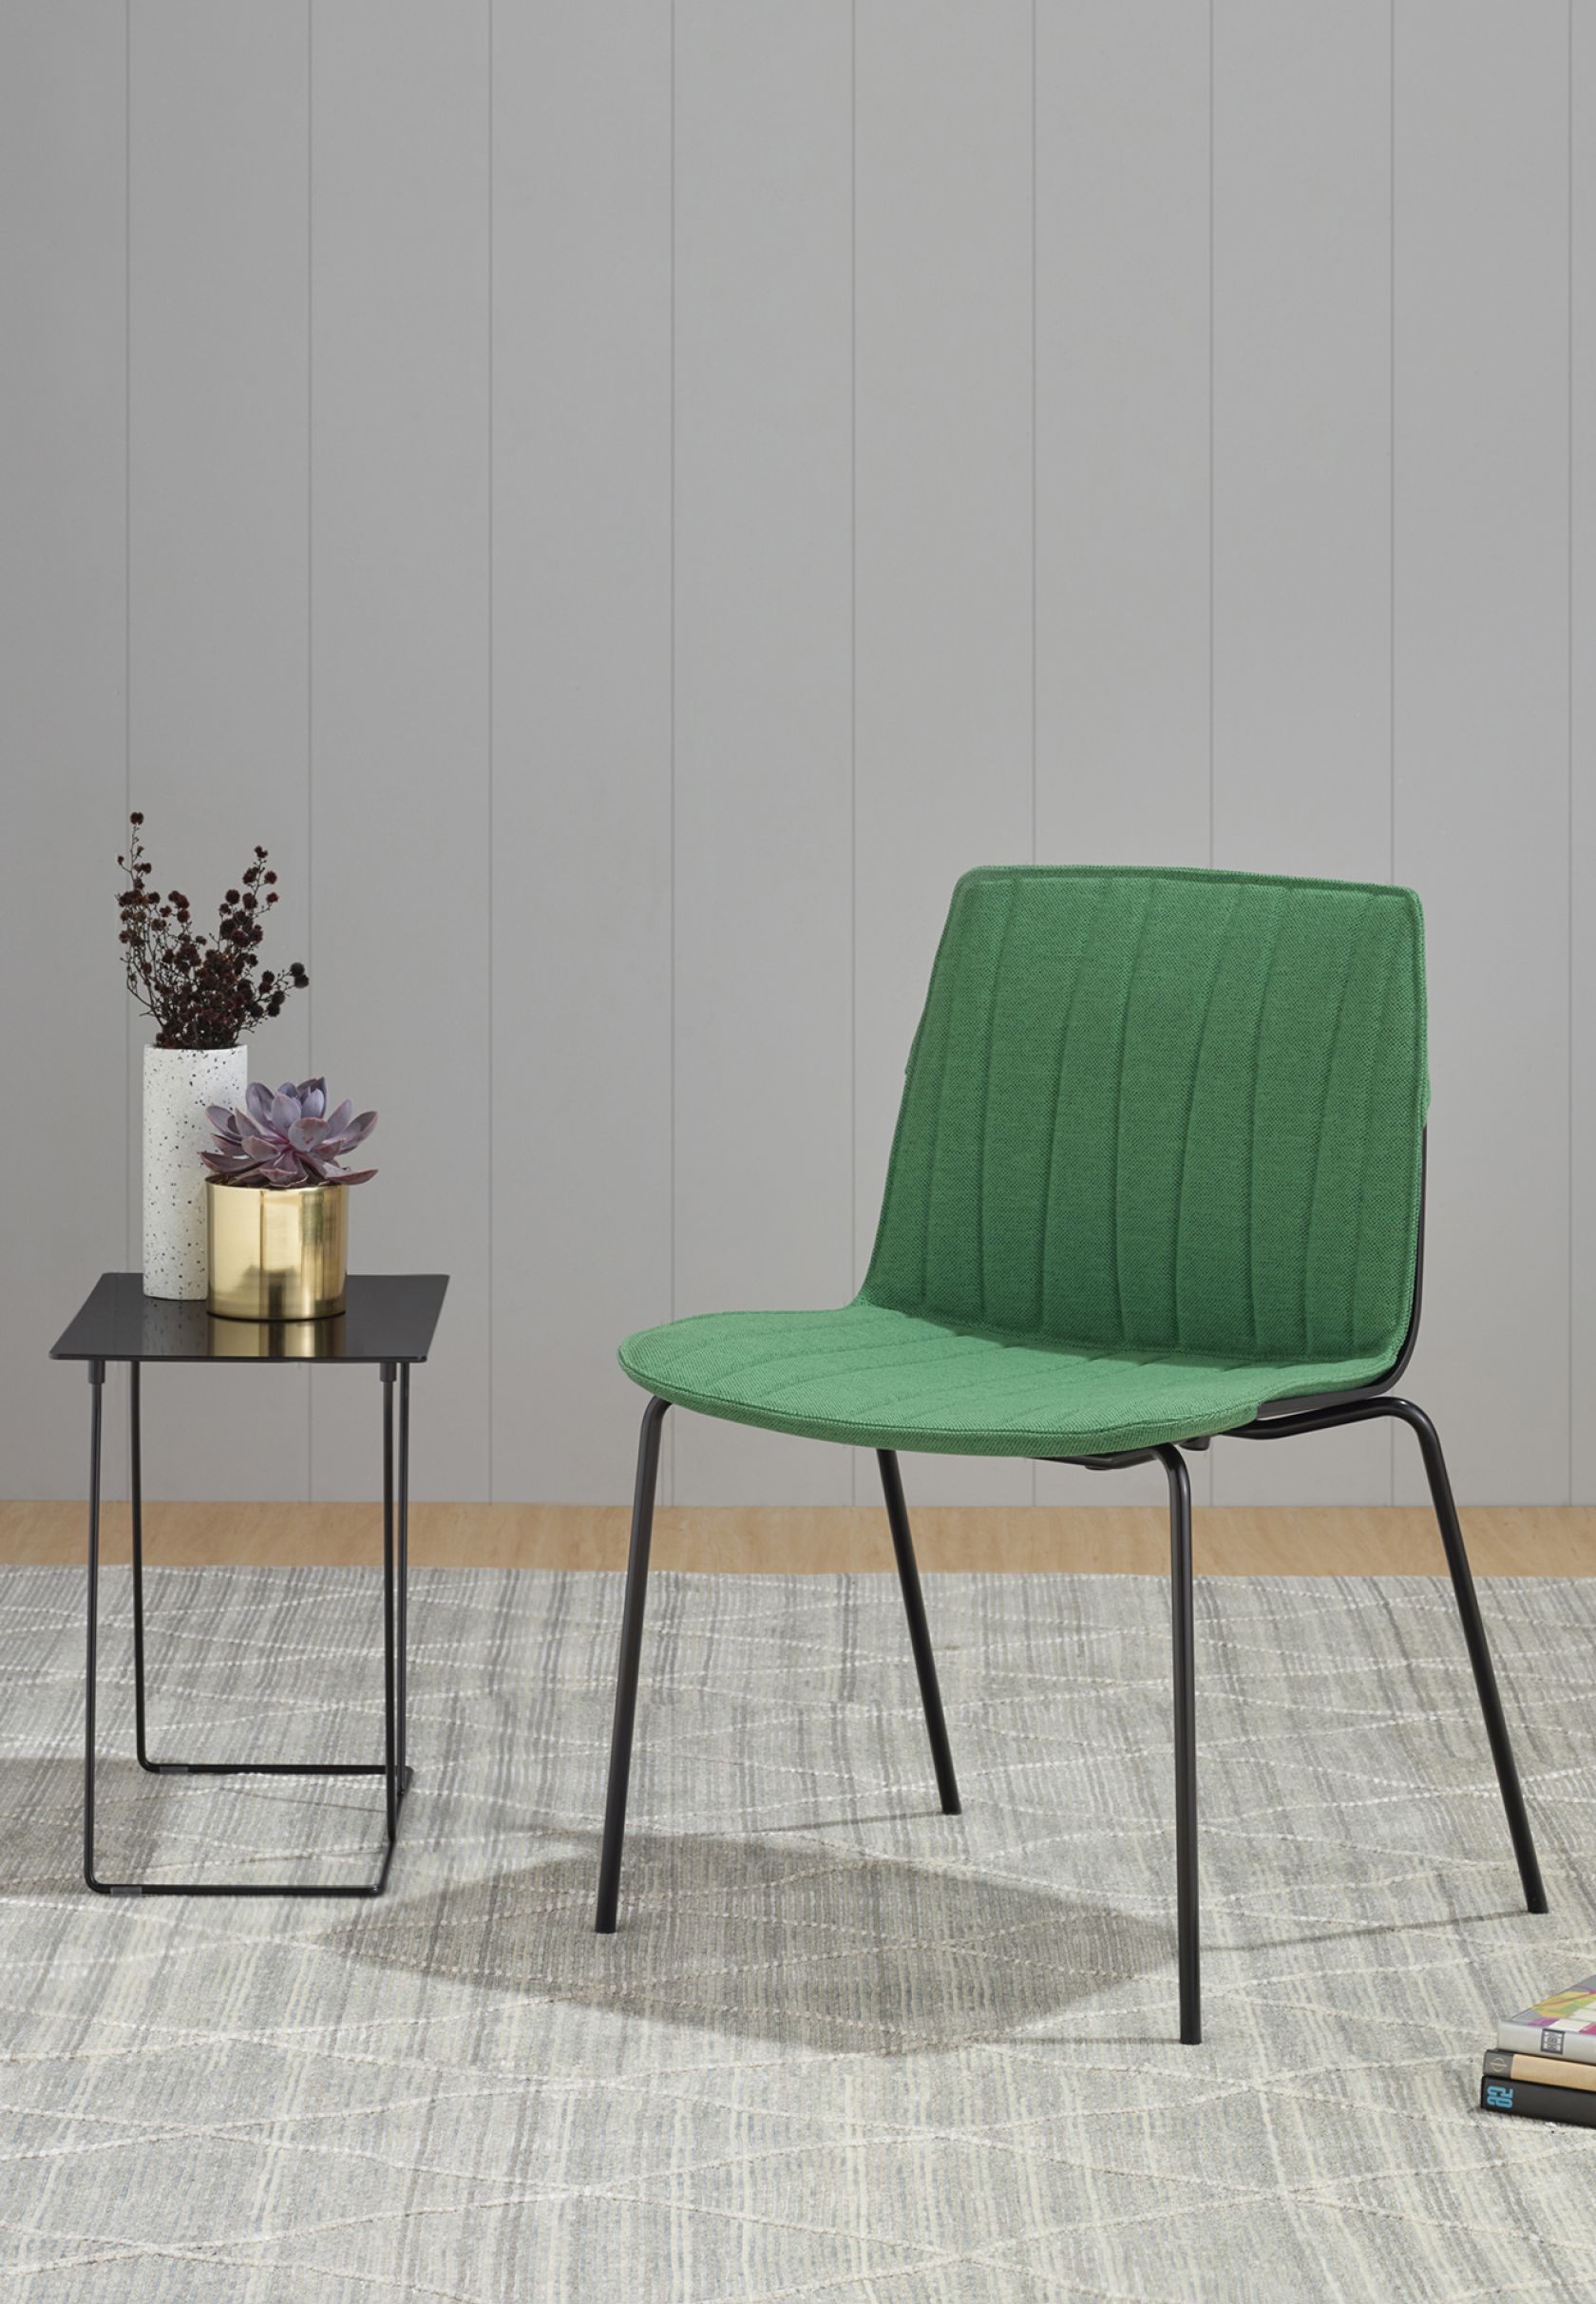 MR Chair Green and Tango Table